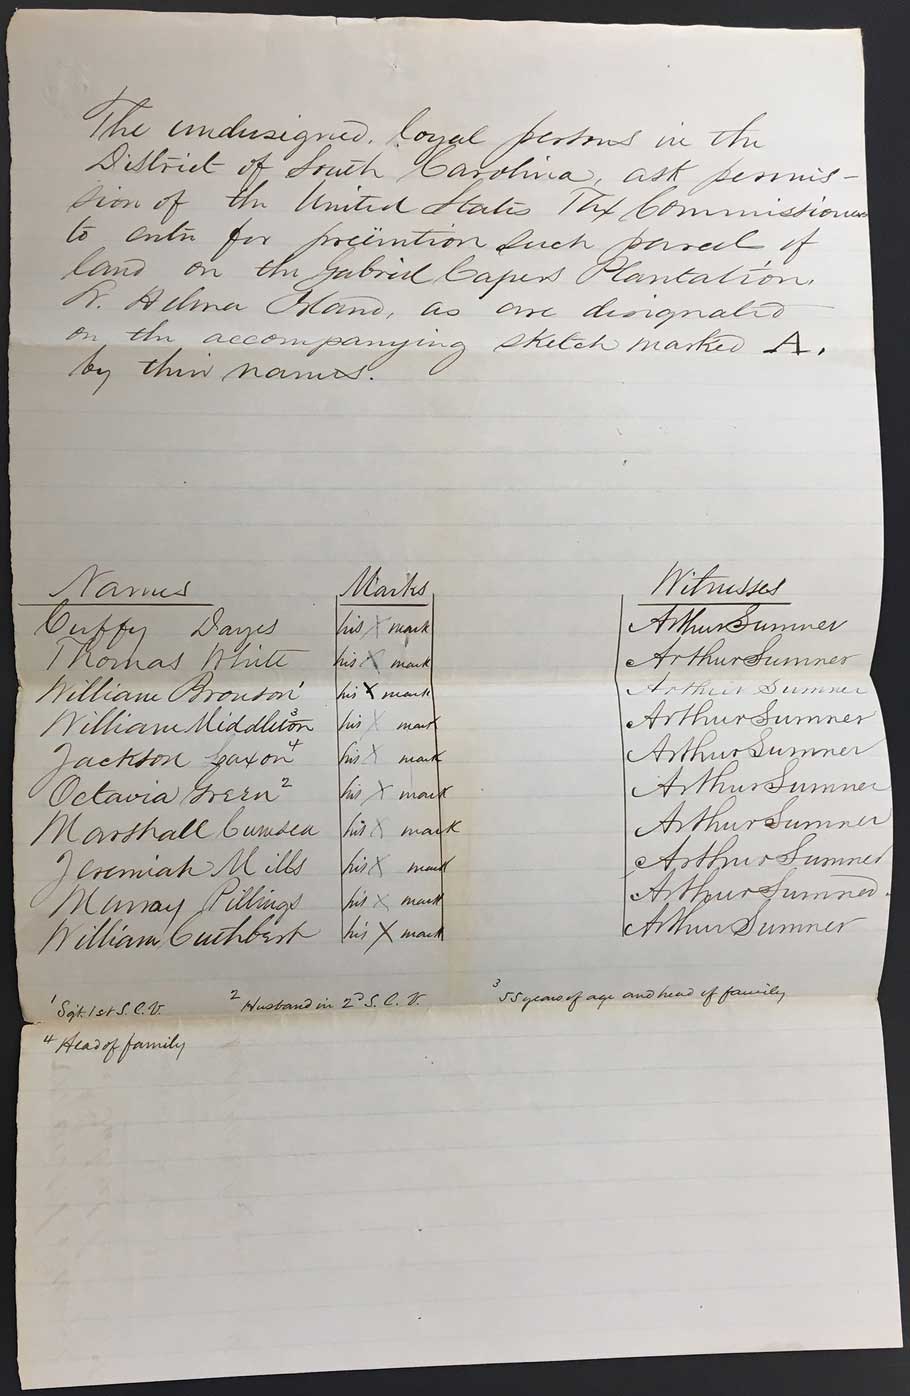 Land Claim for the Gabriel Capers Plantation from records of the Internal Revenue Service (Record Group 58), January 29, 1864